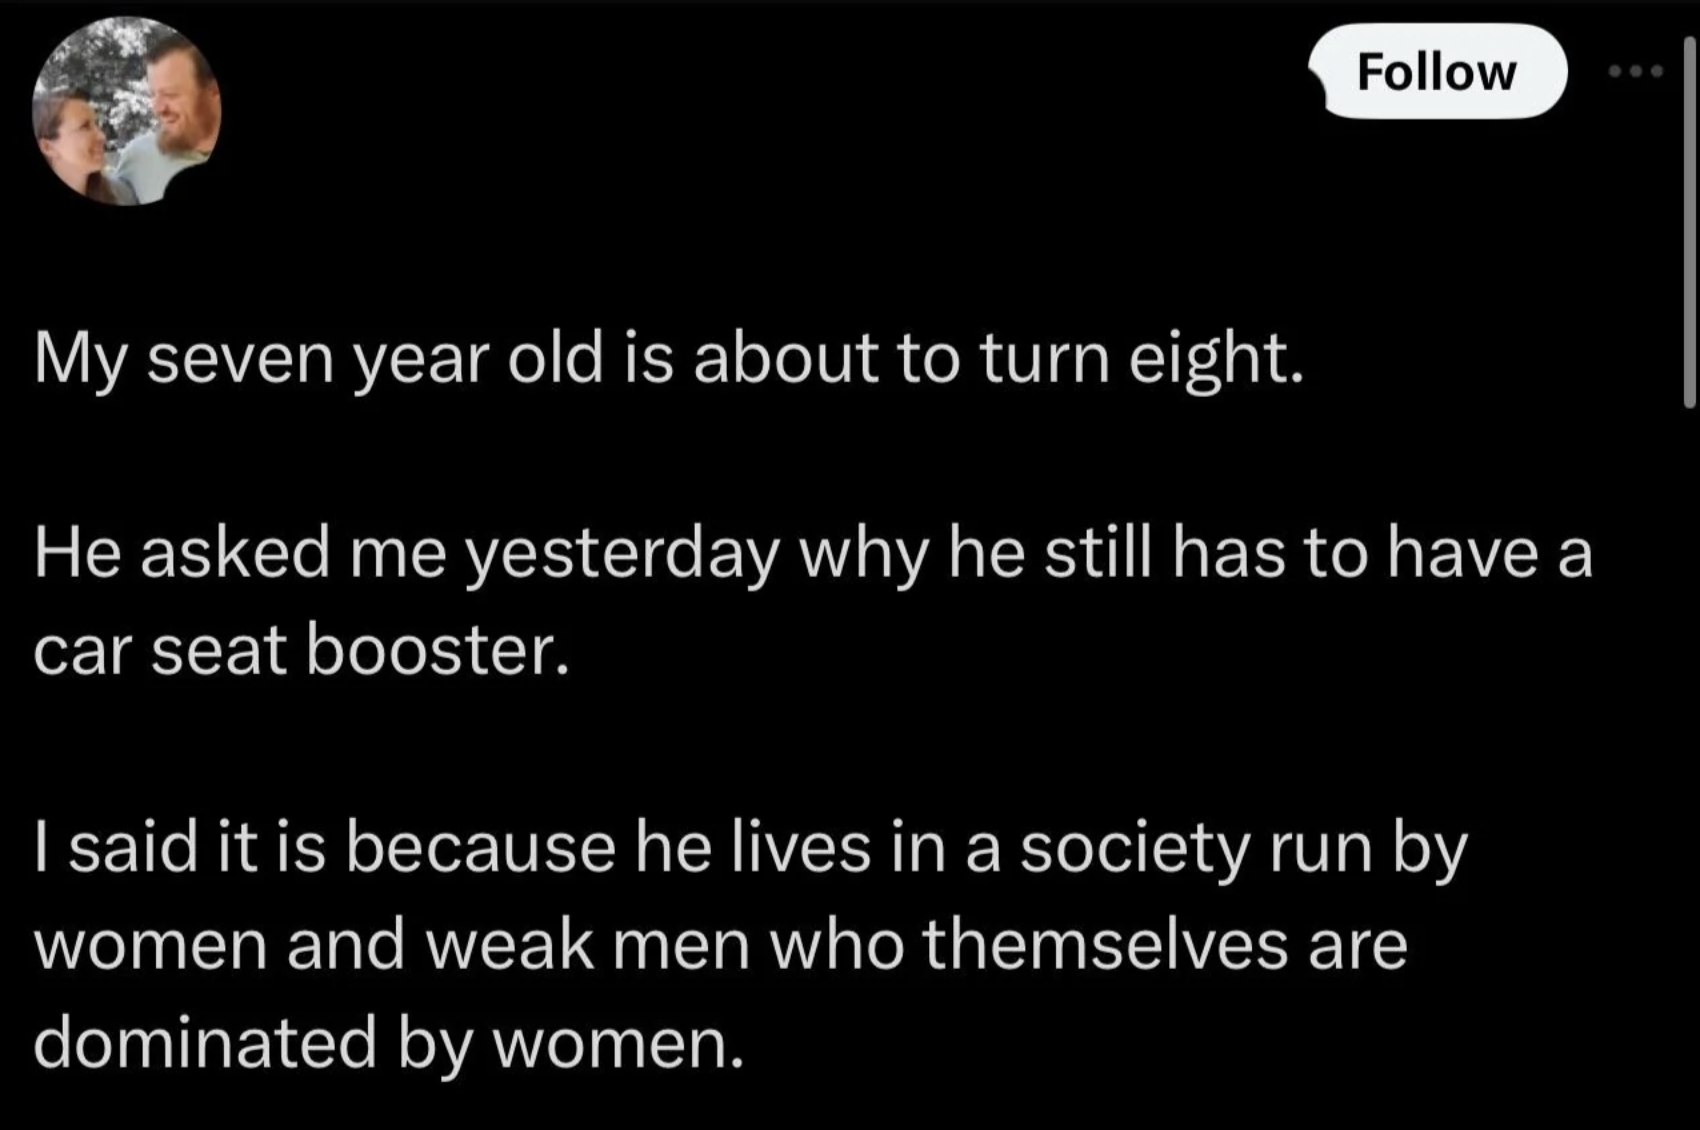 screenshot - My seven year old is about to turn eight. He asked me yesterday why he still has to have a car seat booster. I said it is because he lives in a society run by women and weak men who themselves are dominated by women.